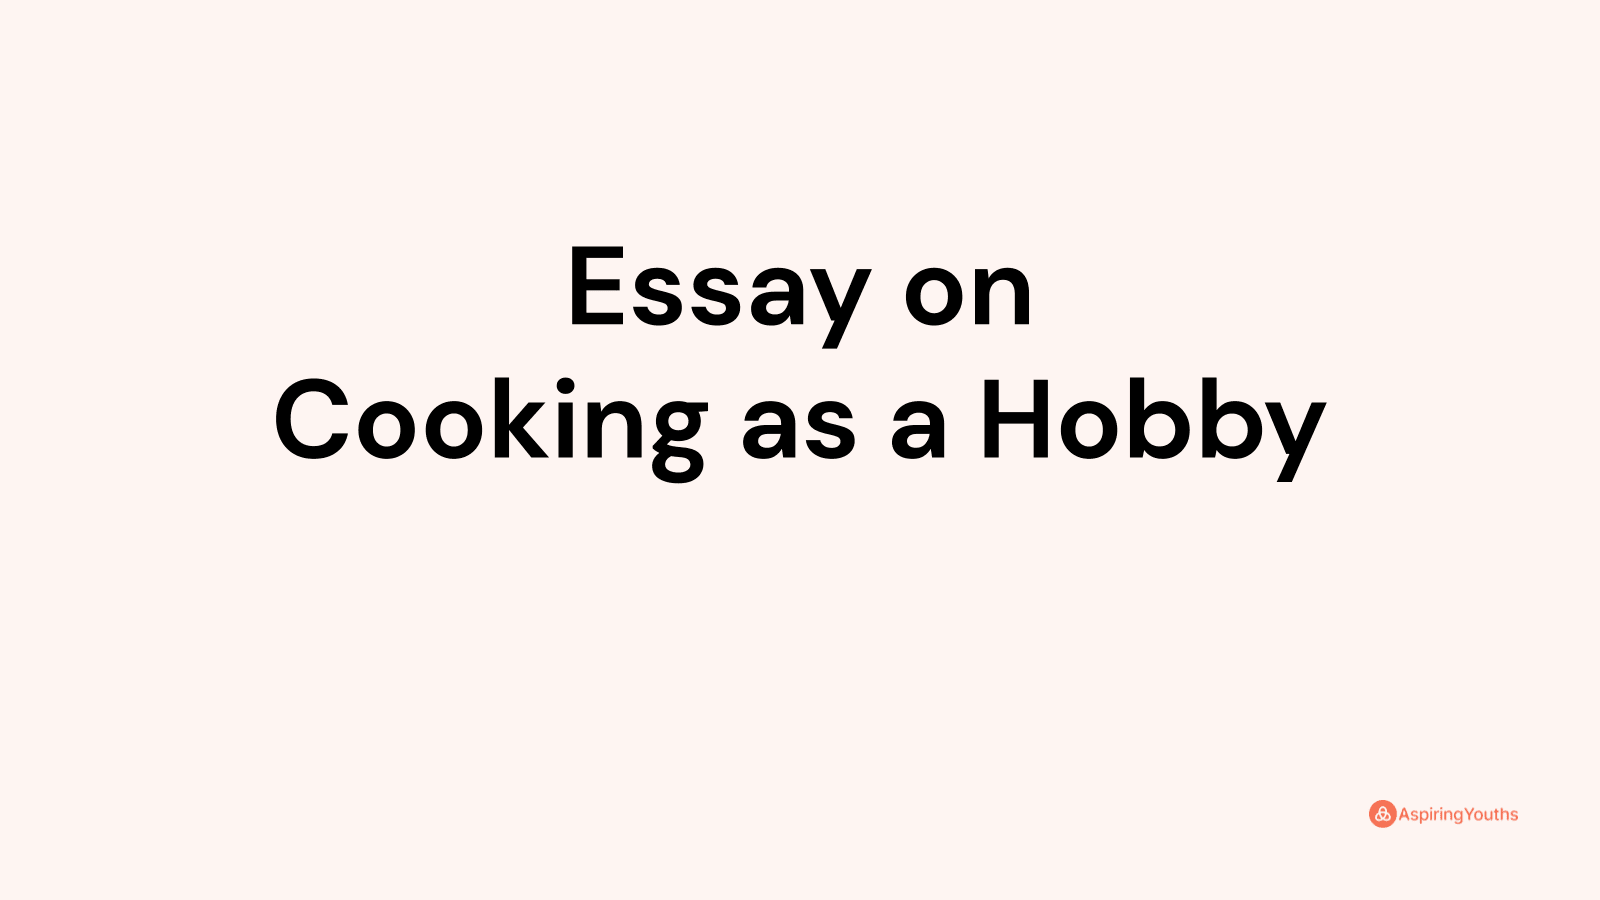 Essay on Cooking as a Hobby